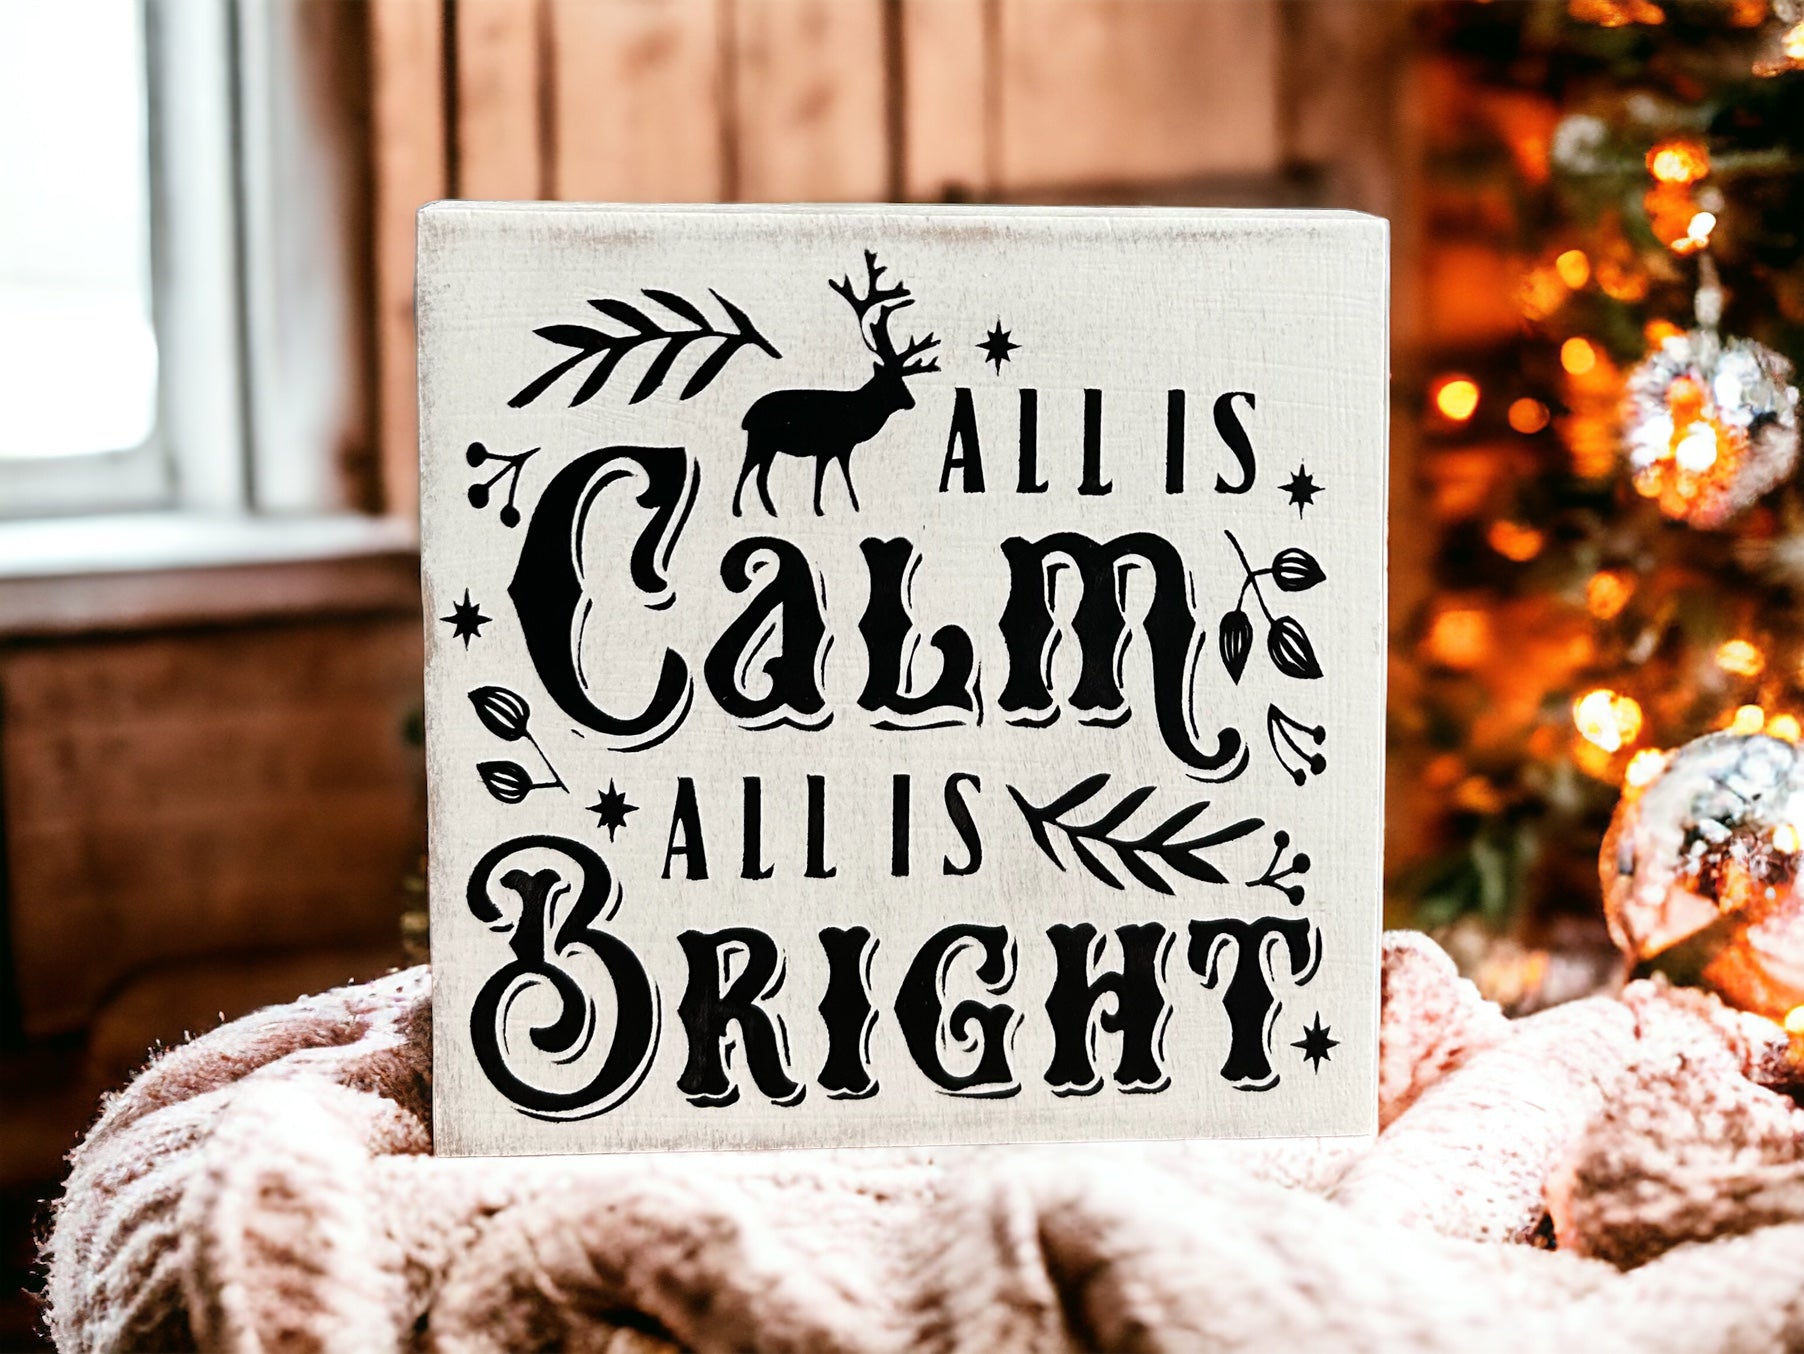 "Calm and bright" wood sign